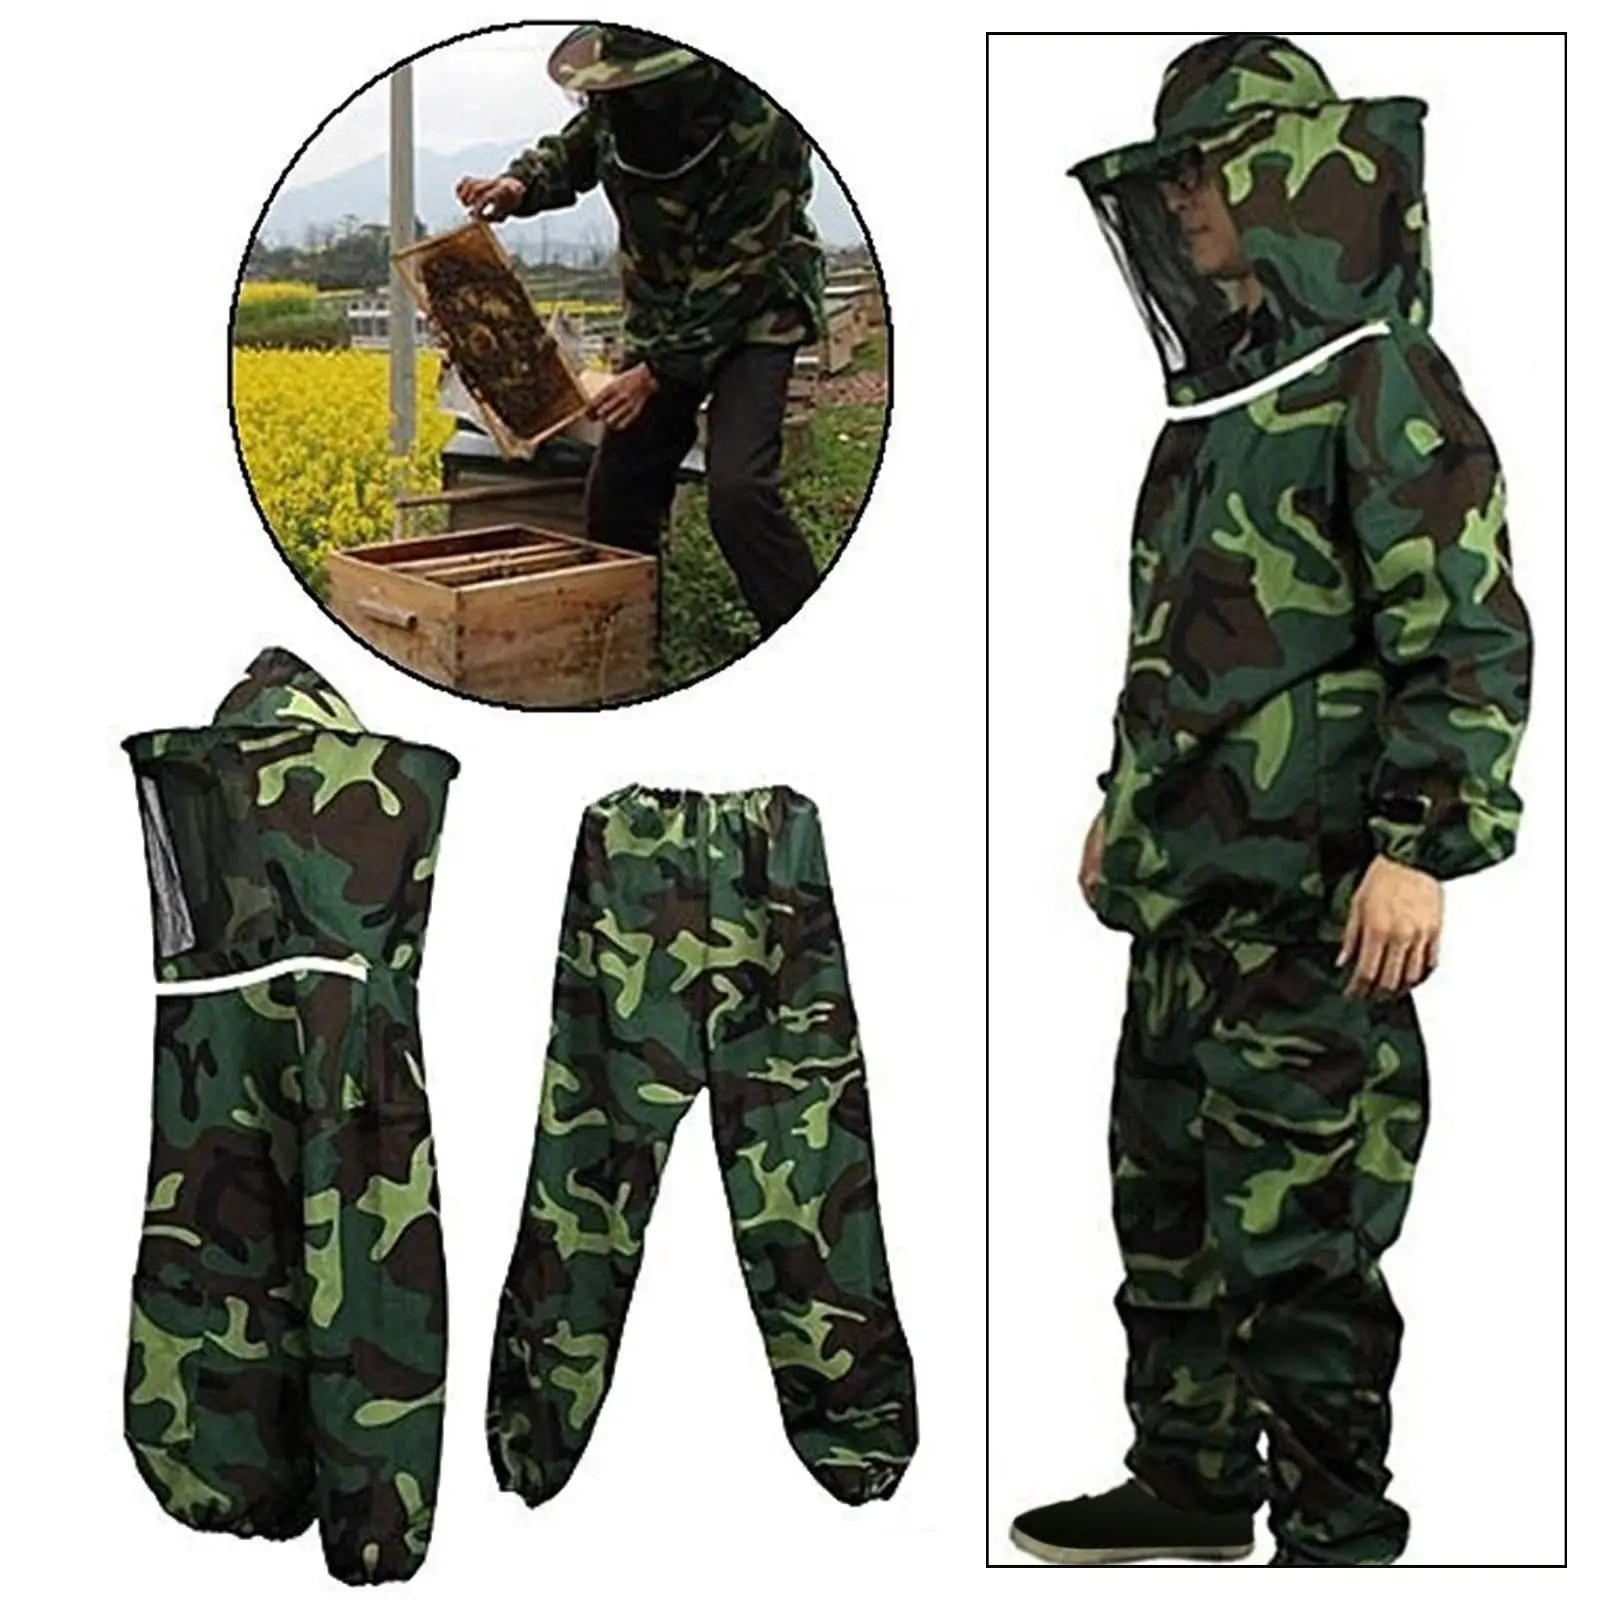 Woman Man Beekeeper Suit Breathable Beekeeper Outfit Beekeeping Protective Clothes with Veil and Pants Full Protection